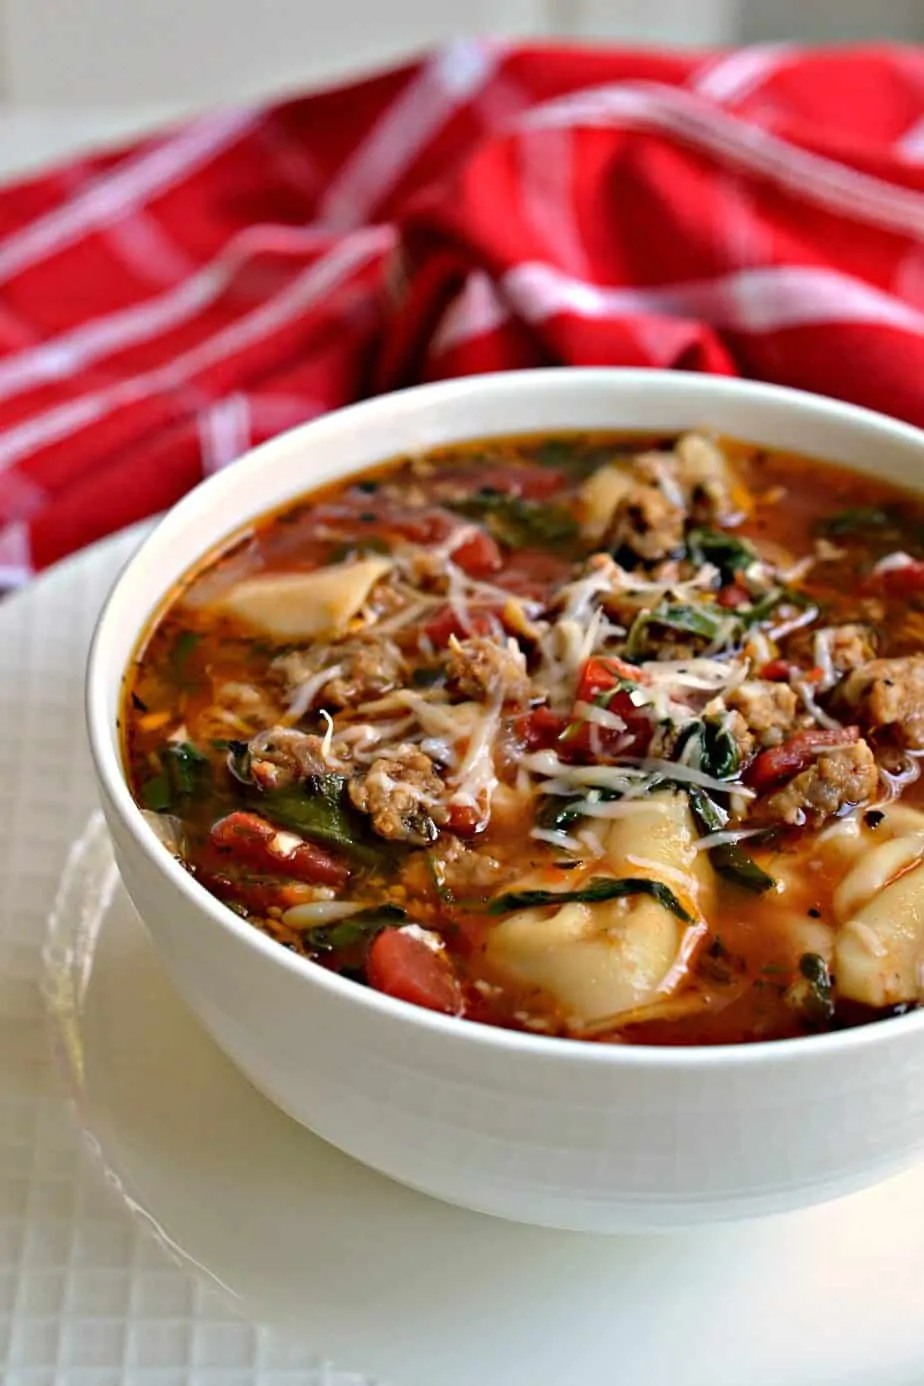 How to make tortellini soup